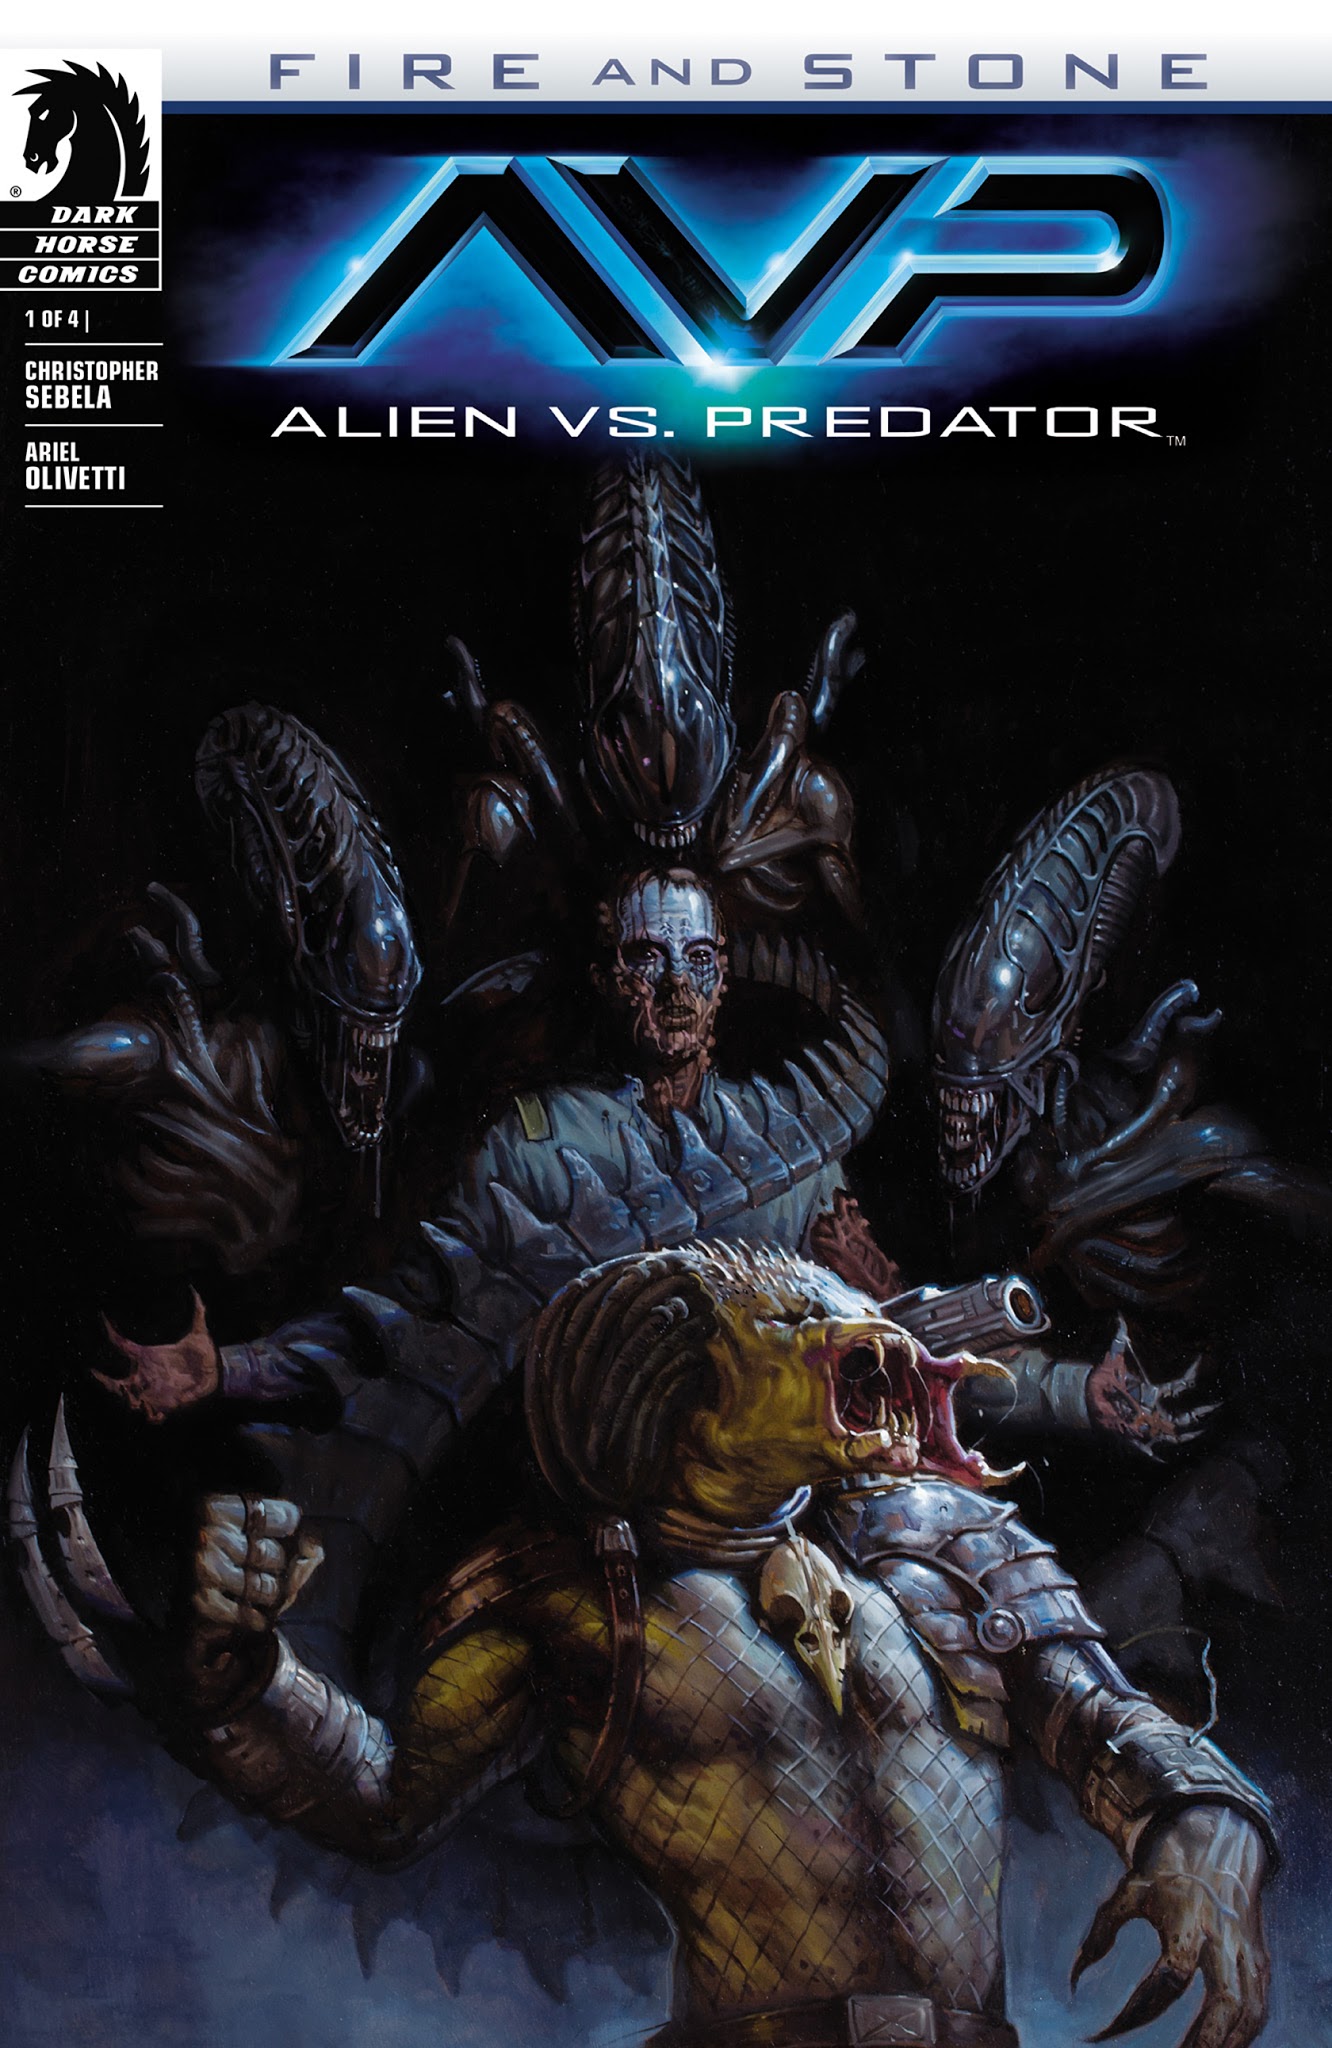 Alien Vs Predator Fire And Stone Issue 1 | Read Alien Vs Predator Fire And  Stone Issue 1 comic online in high quality. Read Full Comic online for free  - Read comics